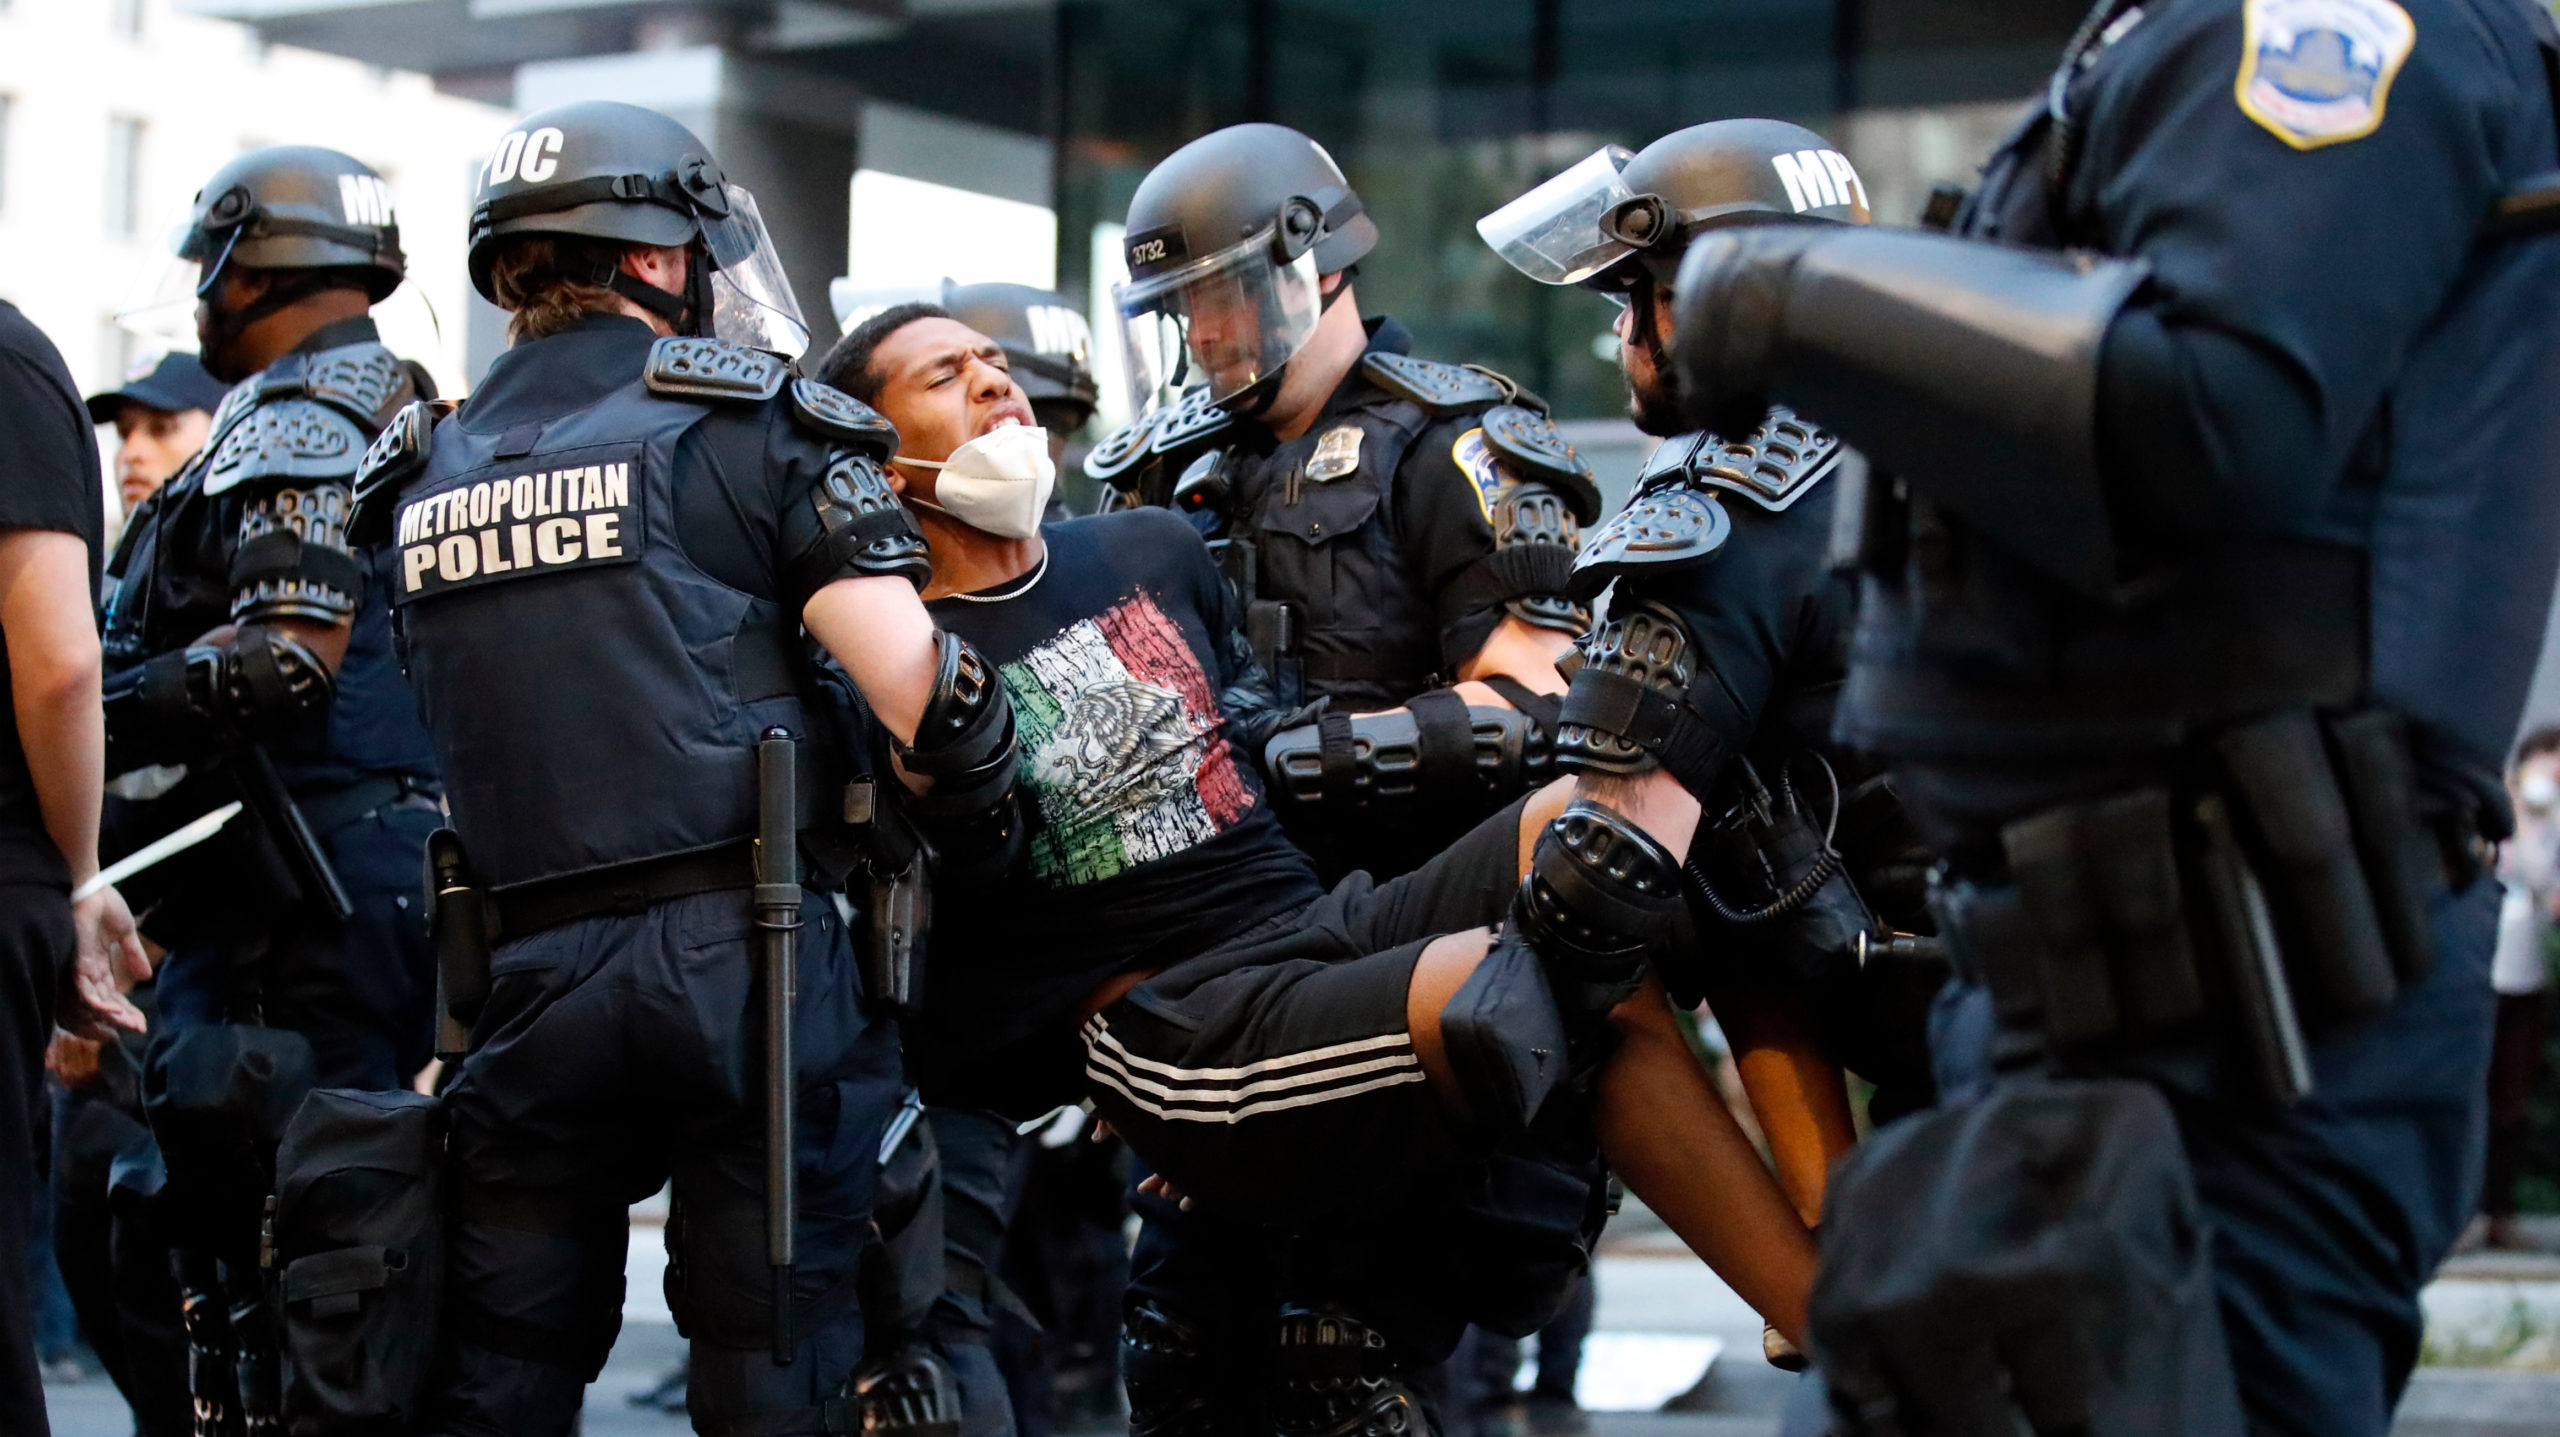 A demonstrator being taken into custody by police near the White House on June 1, 2020. (Photo: Alex Brandon, AP)